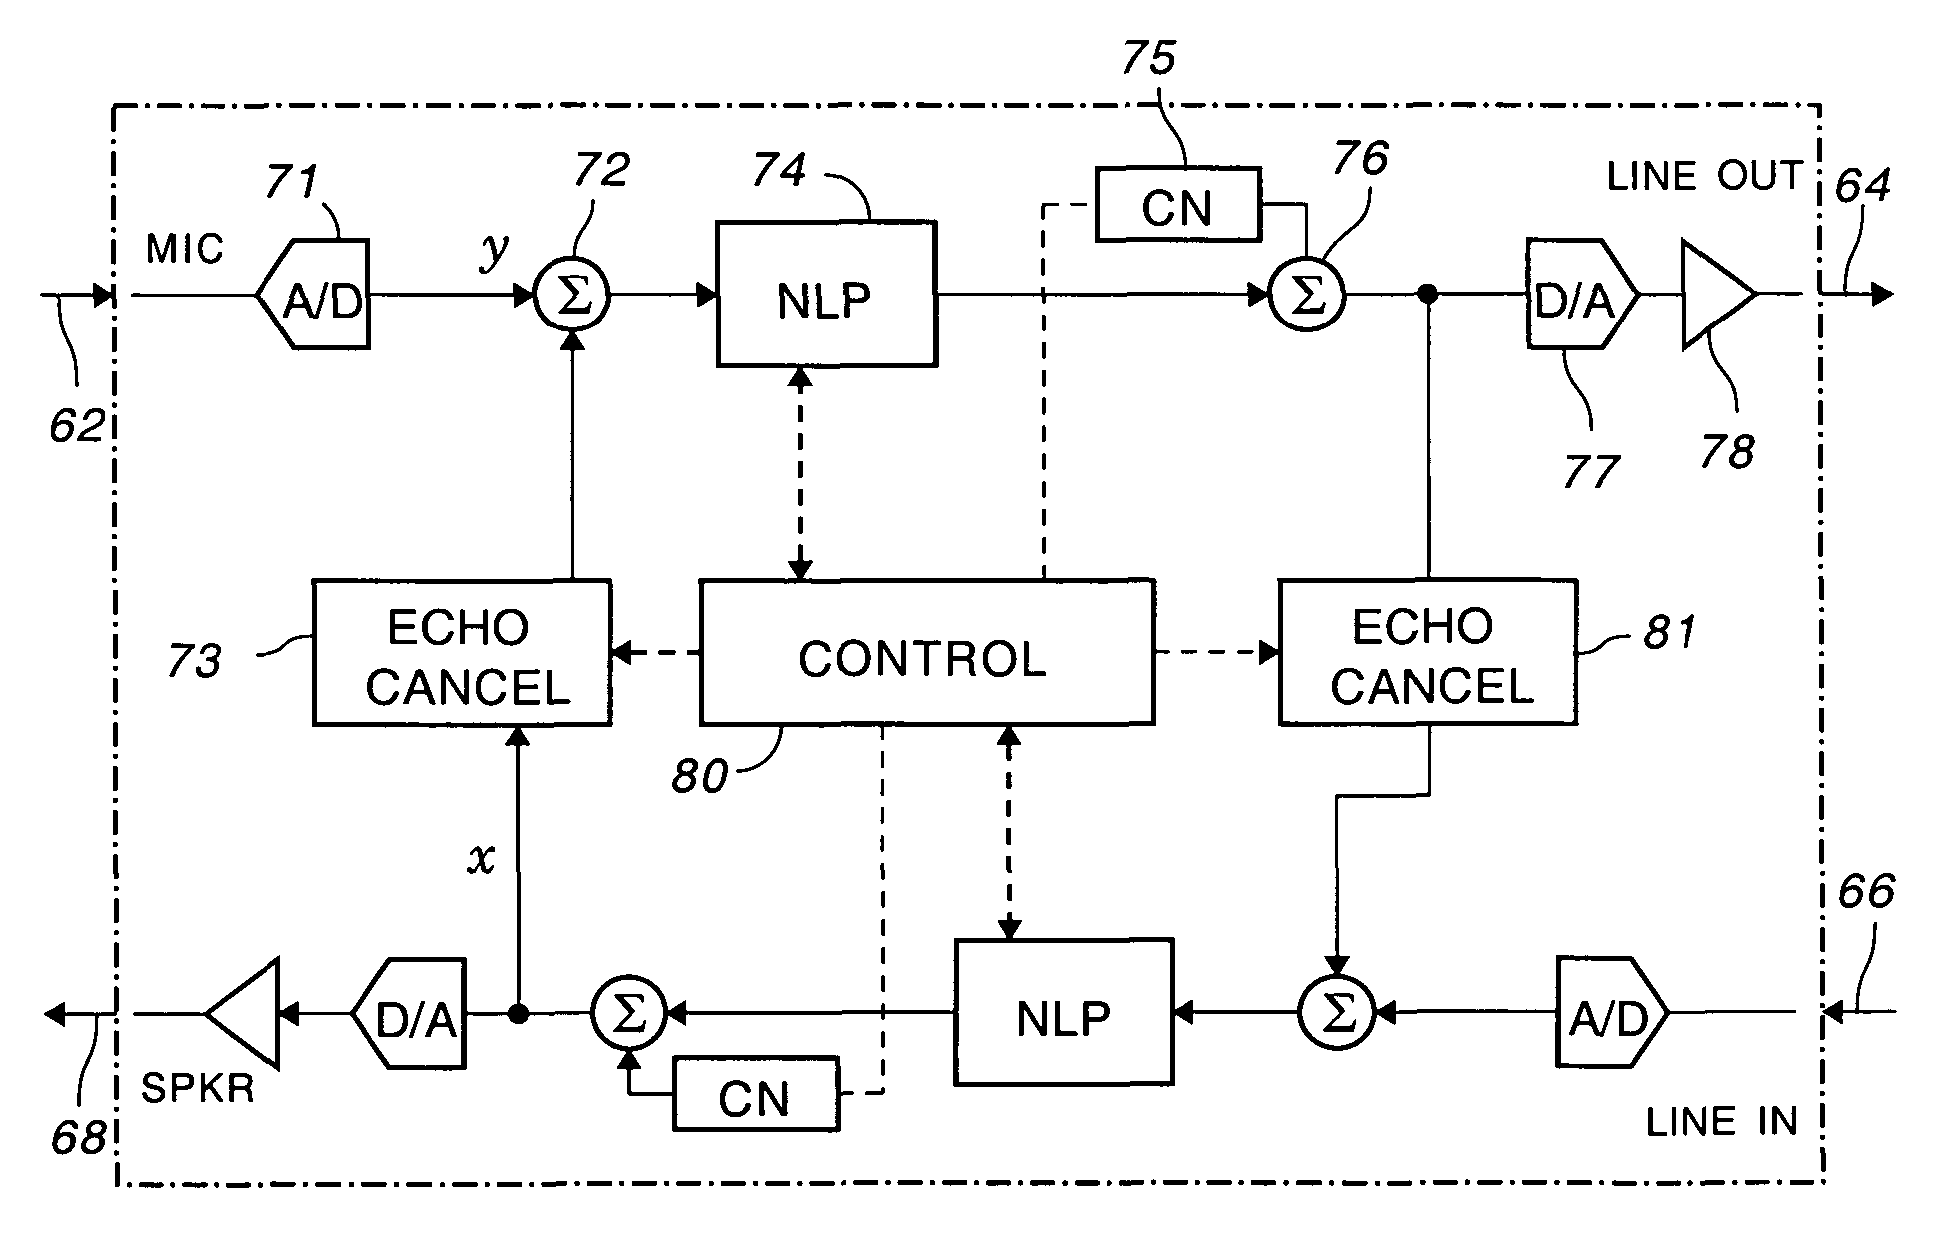 Music detector for echo cancellation and noise reduction